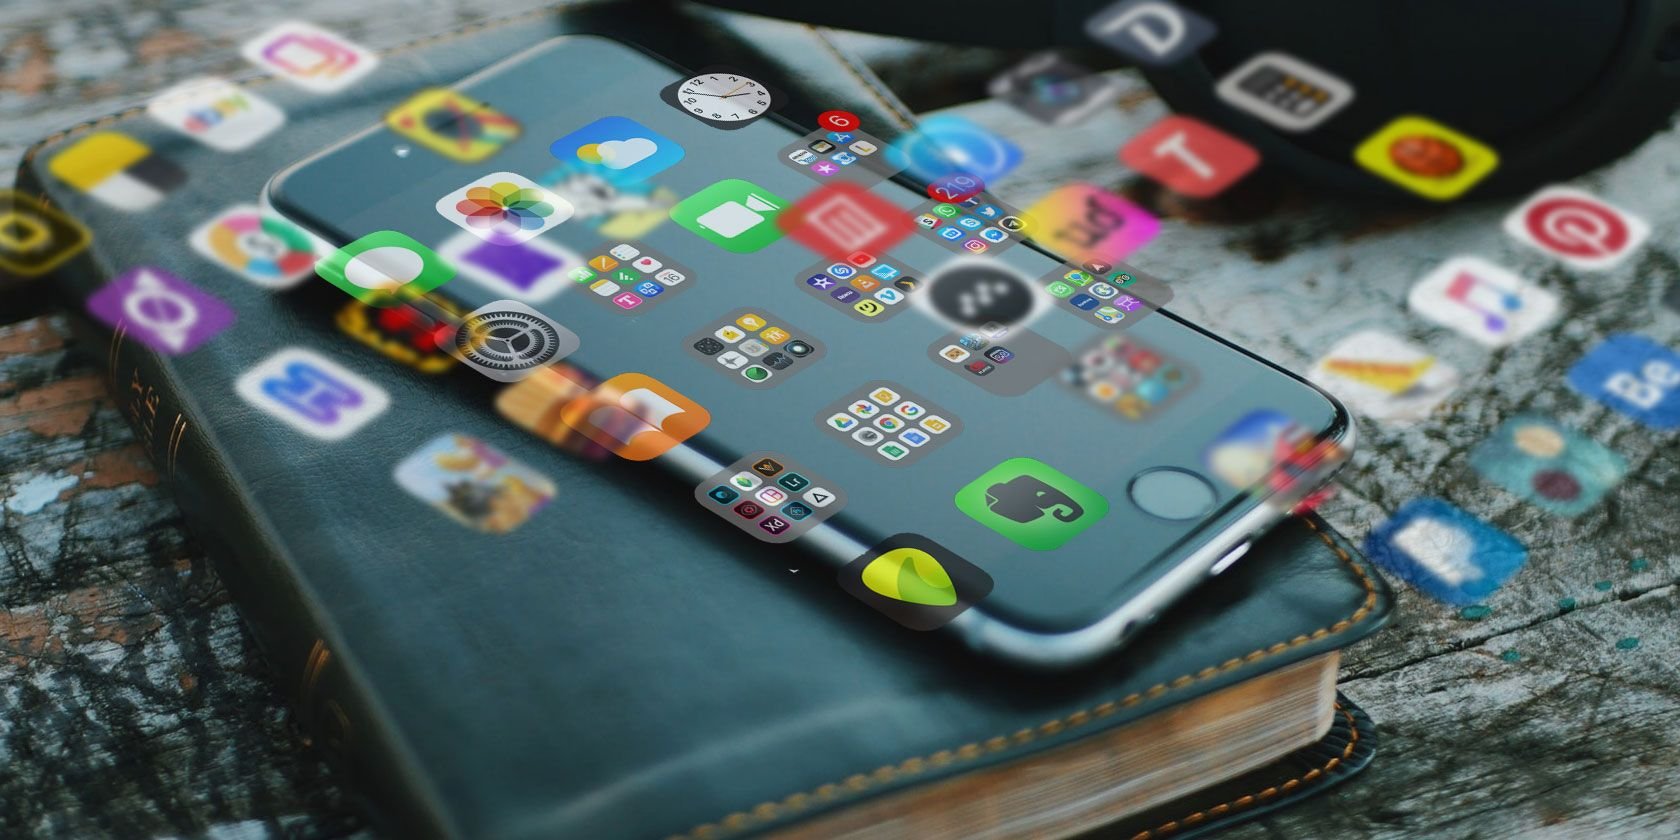 7 Tips for Organizing Your iPhone or iPad Apps More Effectively